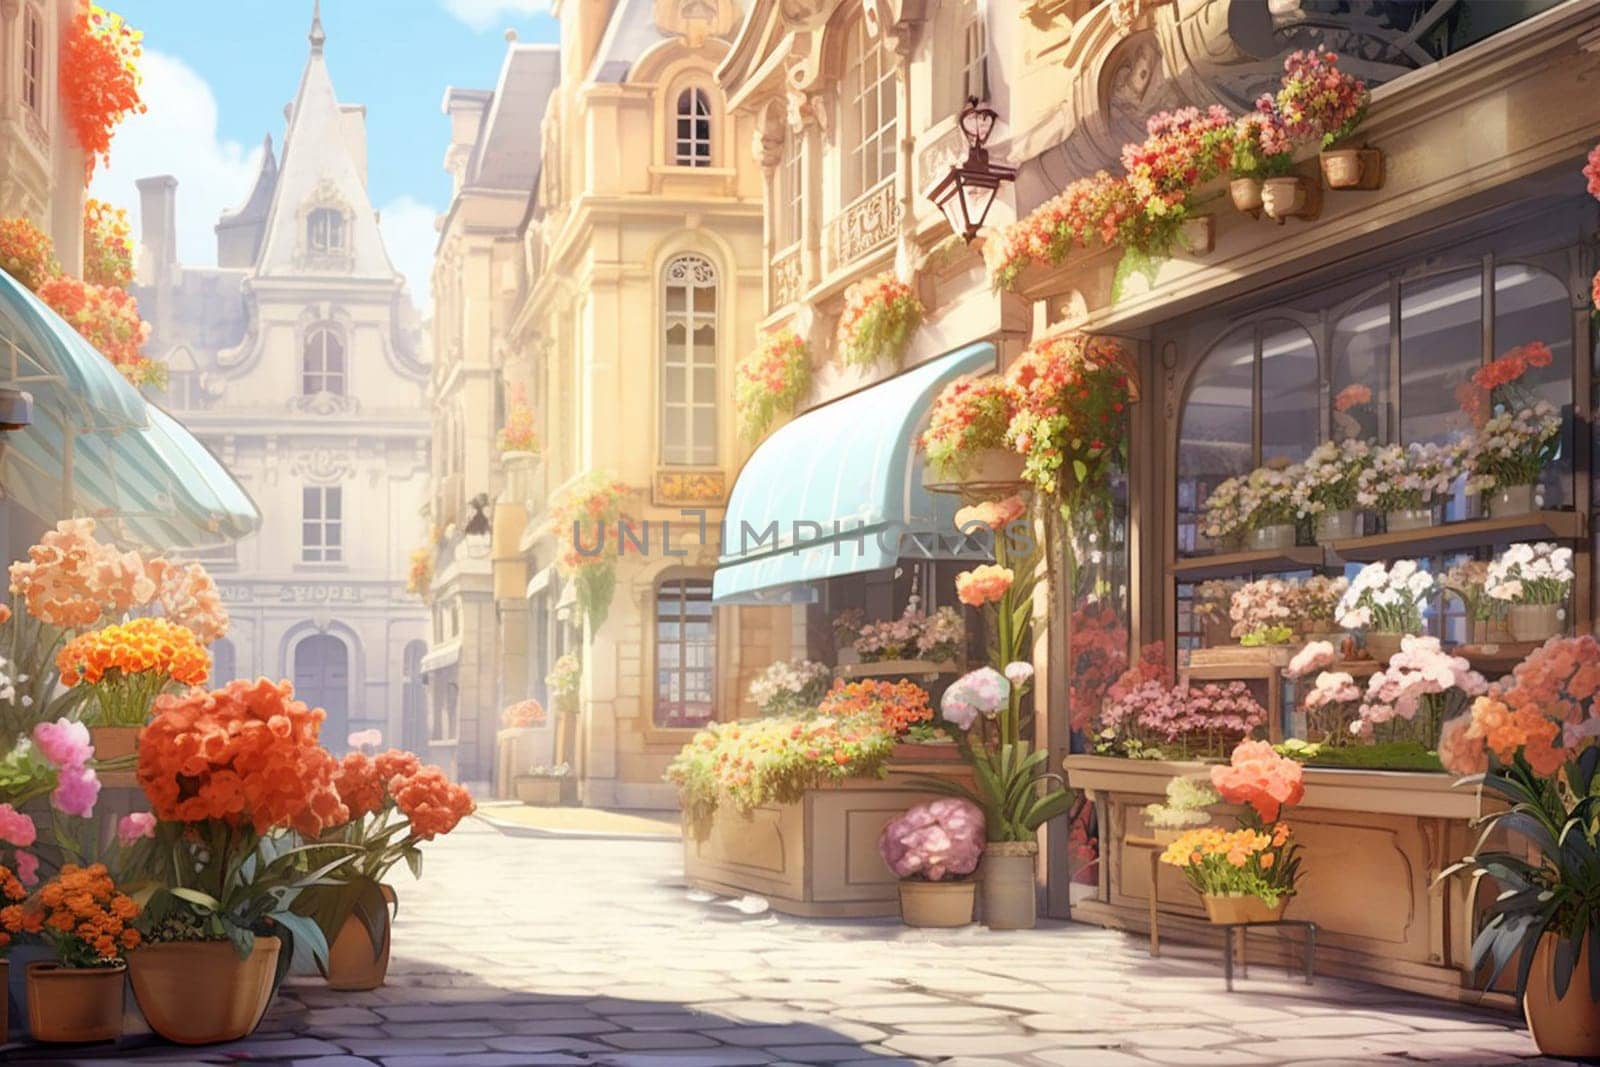 Flower shop on the ground floor of a two-story building. High quality illustration